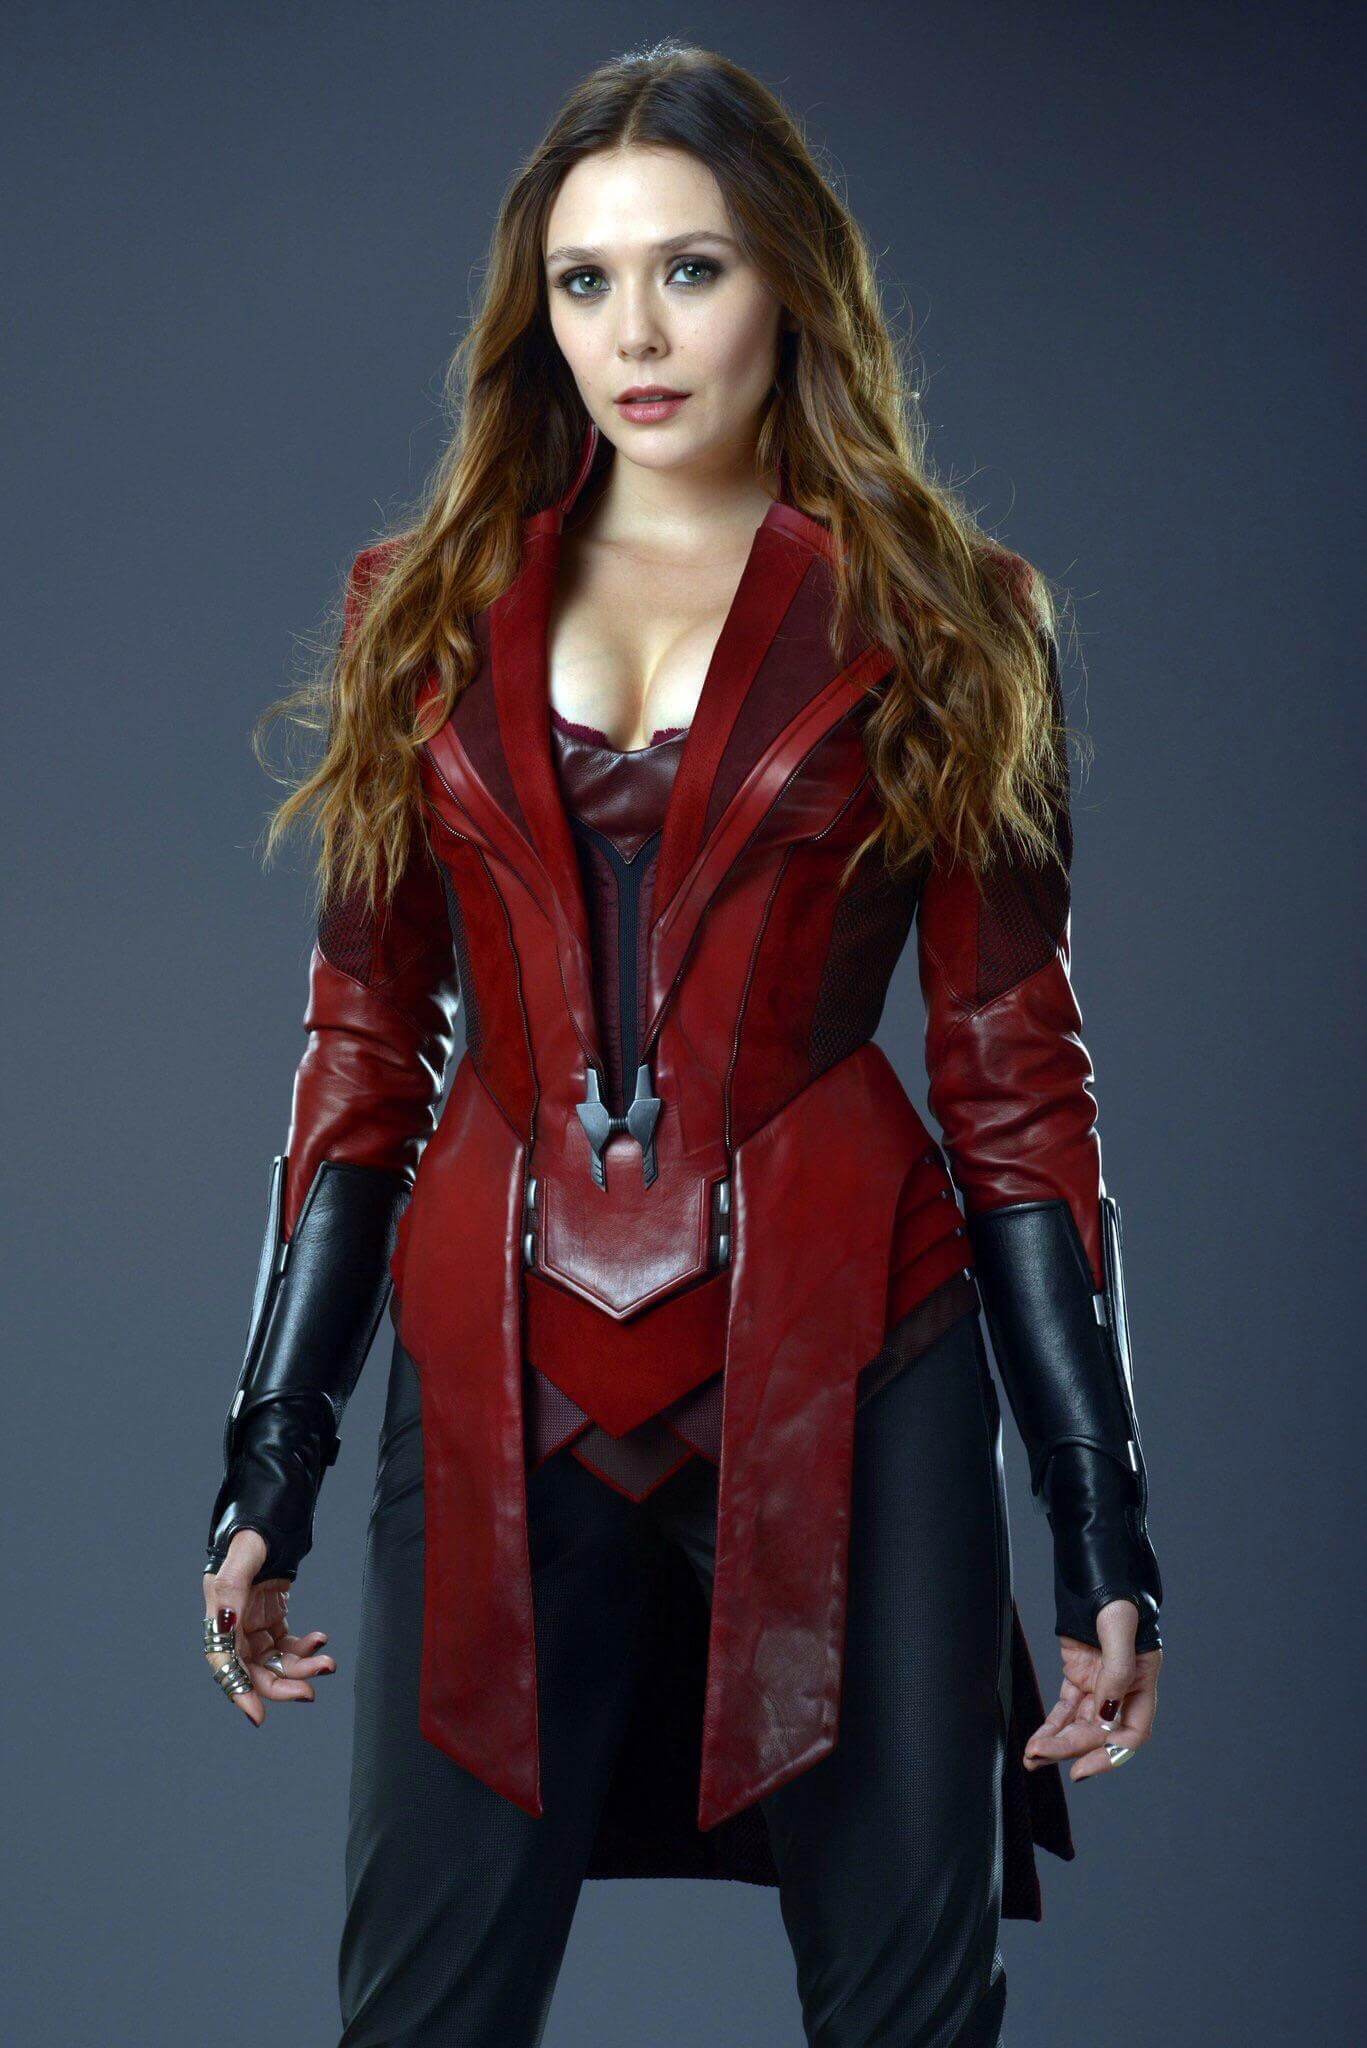 49 Hot Pictures Of Elizabeth Olsen Which Will Make You Fantasize Her | Best Of Comic Books